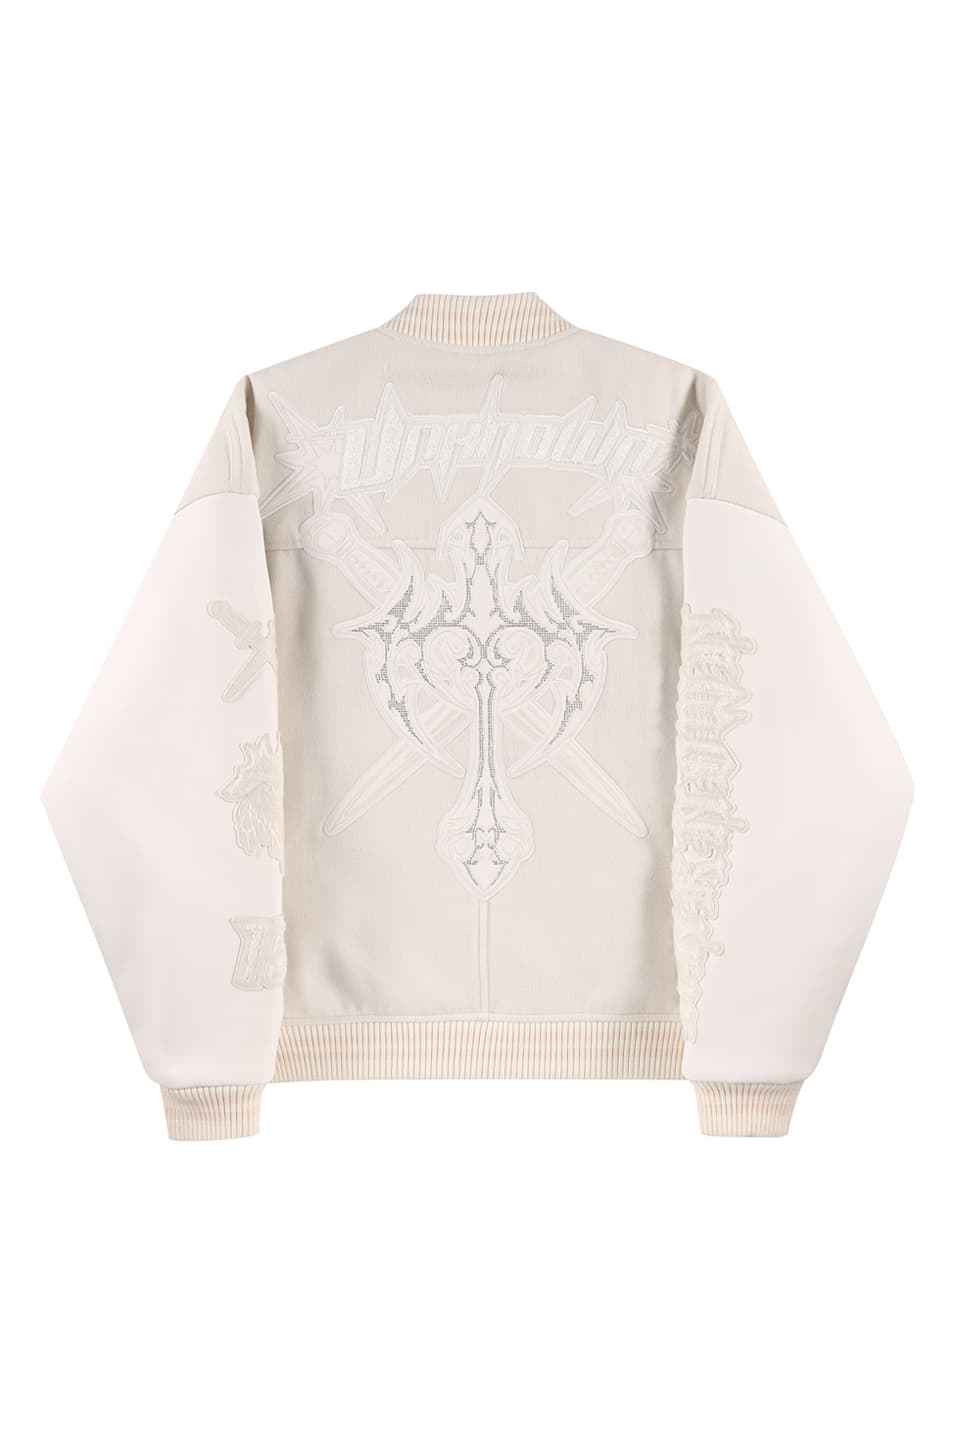 unknownLondonunknown GRAPHIC PATCHES VARSITY JACKET